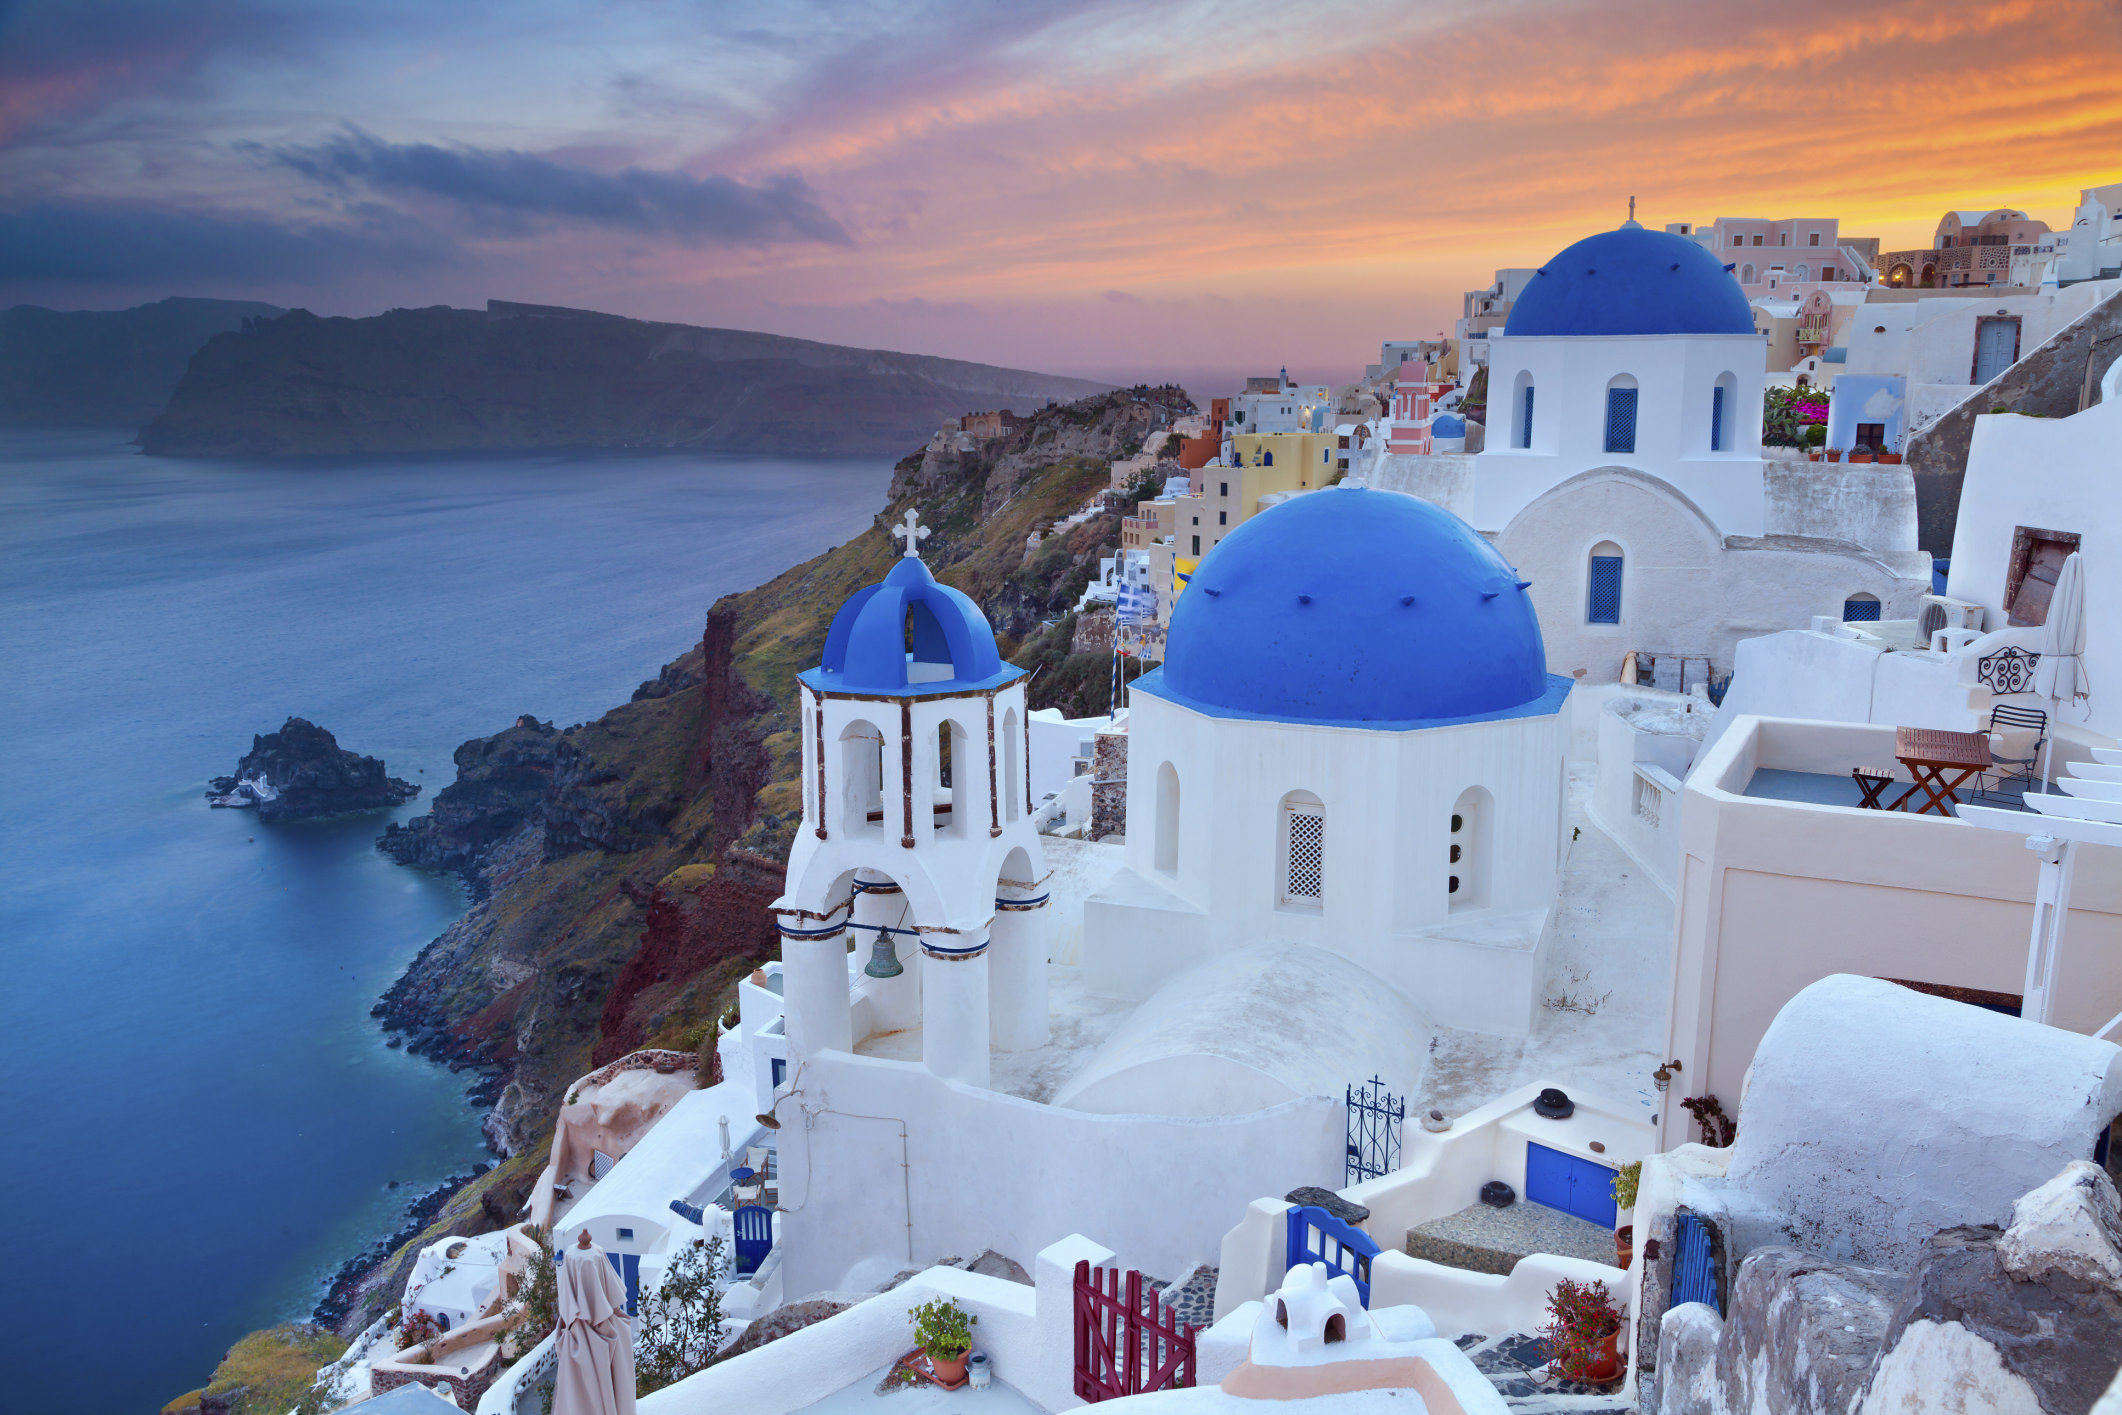 Activities to do While in Santorini